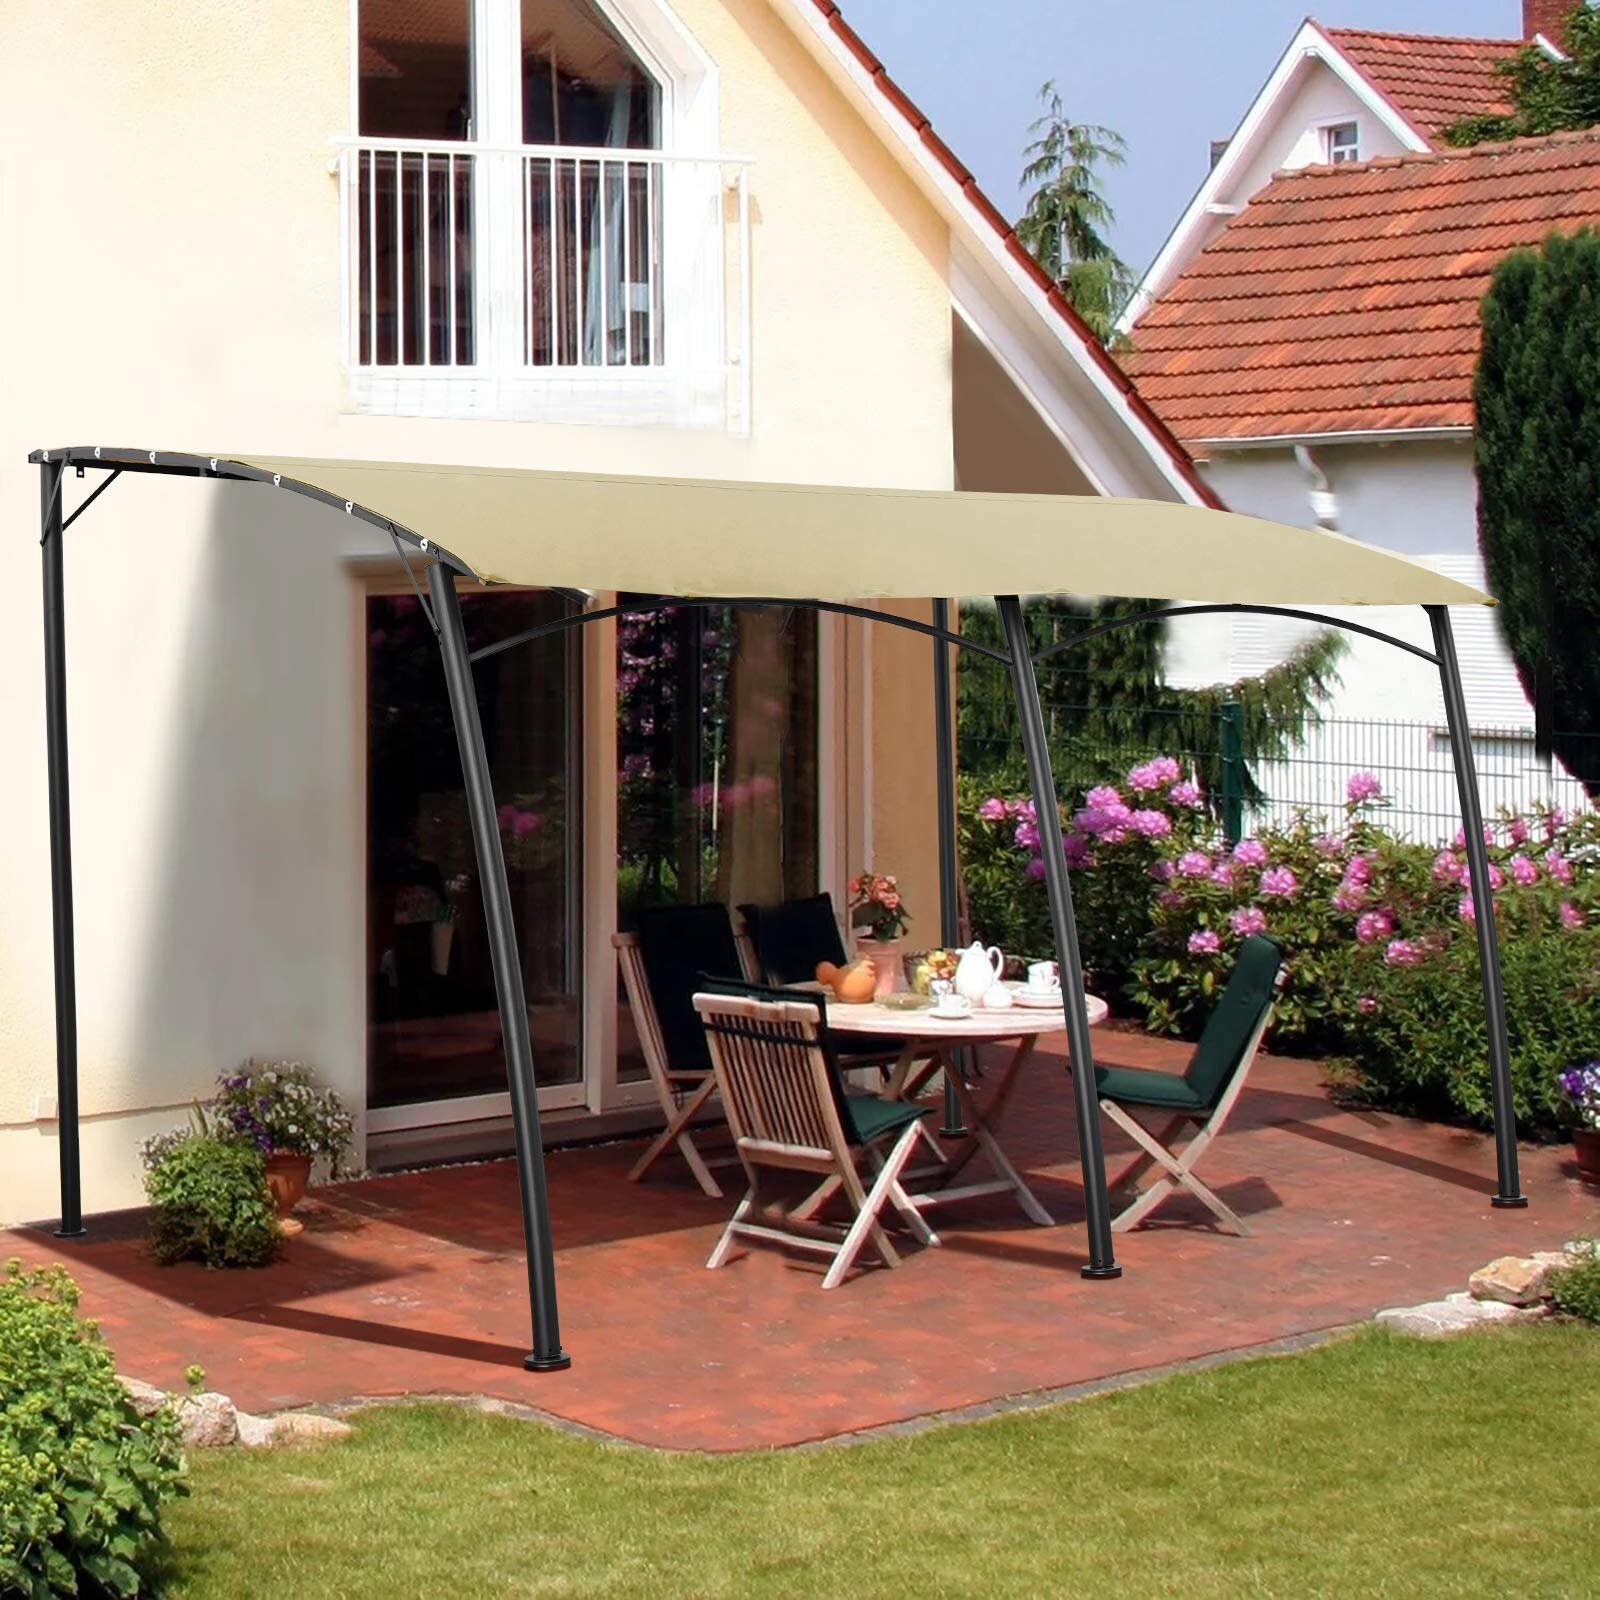 Details about   AECOJOY 10' x 13' Outdoor Patio Gazebo 2-Tier Metal Roof Pavilion Canopy Tent 